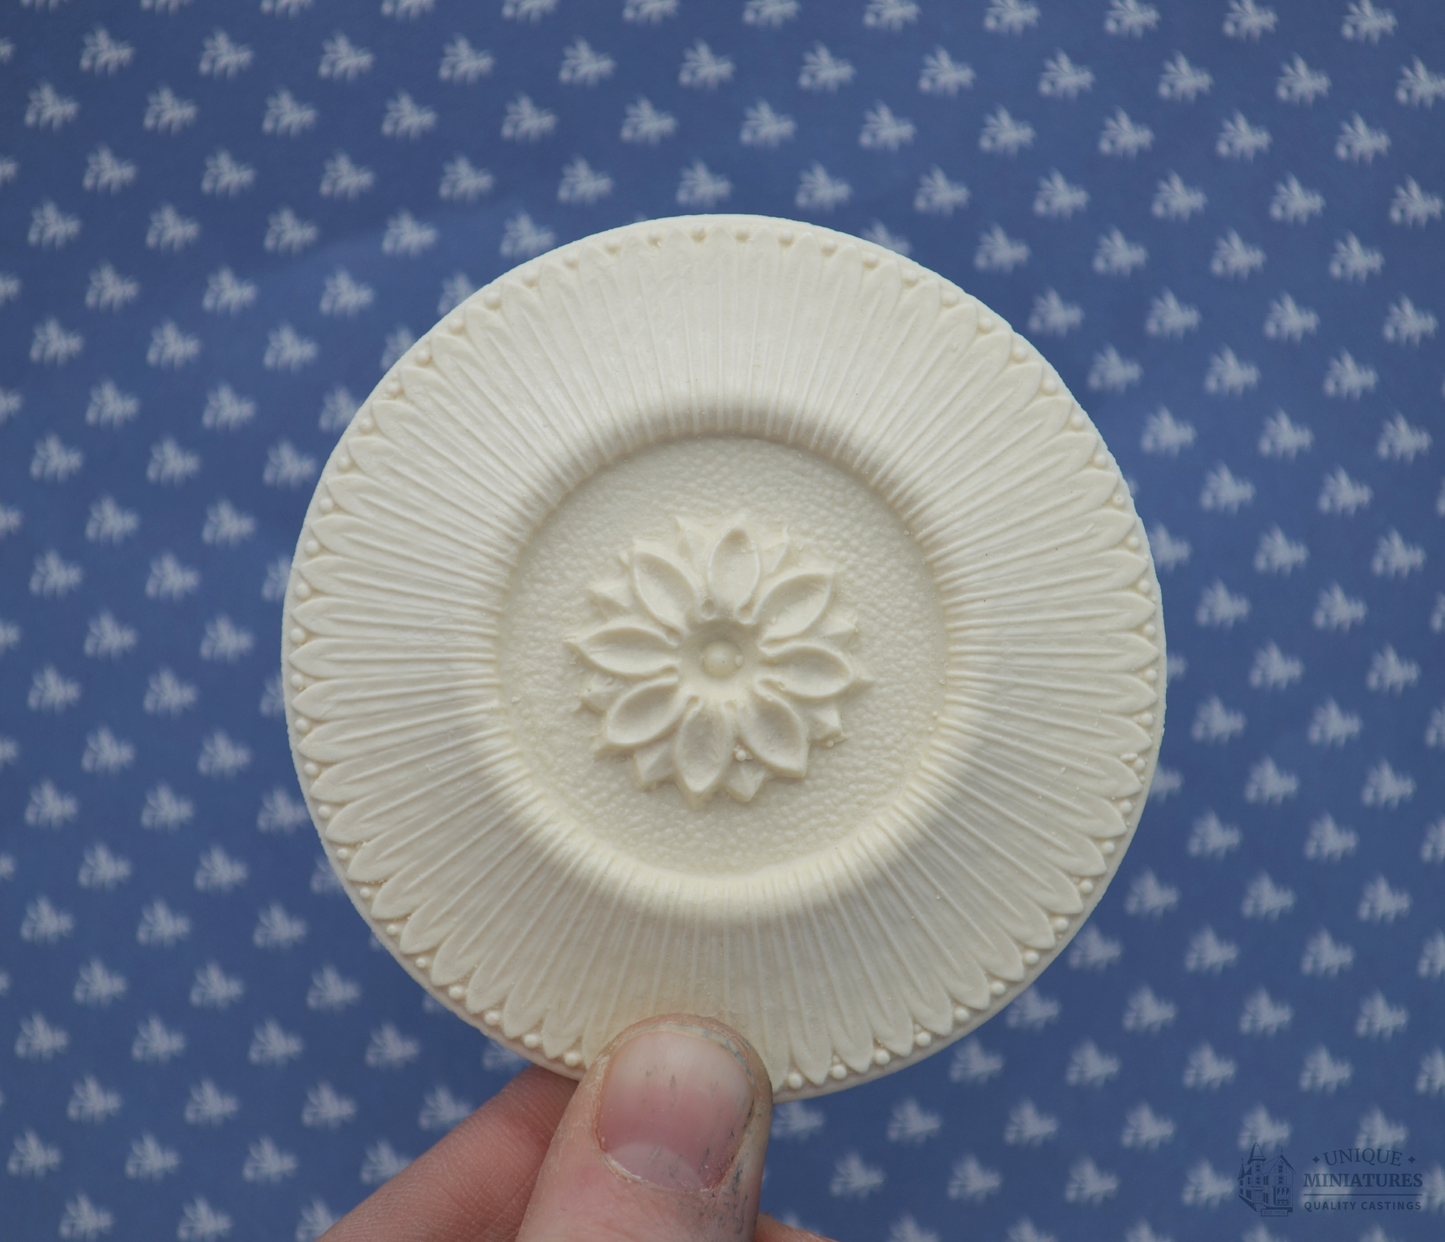 Aster Medallion | 2 7/8" | Miniature Ceiling Carving for Dollhouse